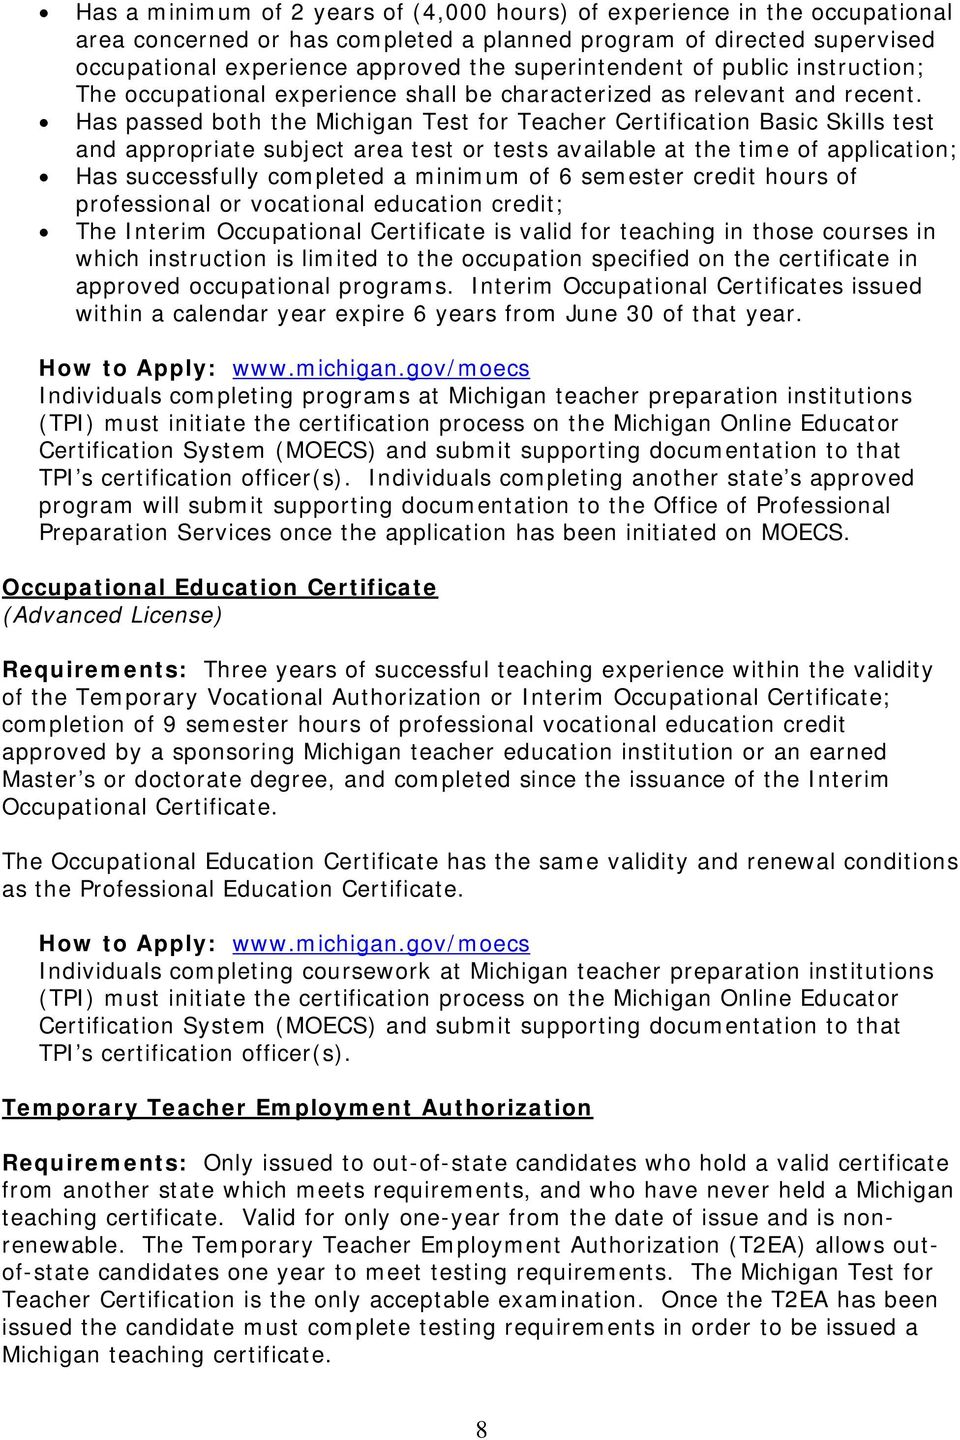 Has passed both the Michigan Test for Teacher Certification Basic Skills test and appropriate subject area test or tests available at the time of application; Has successfully completed a minimum of